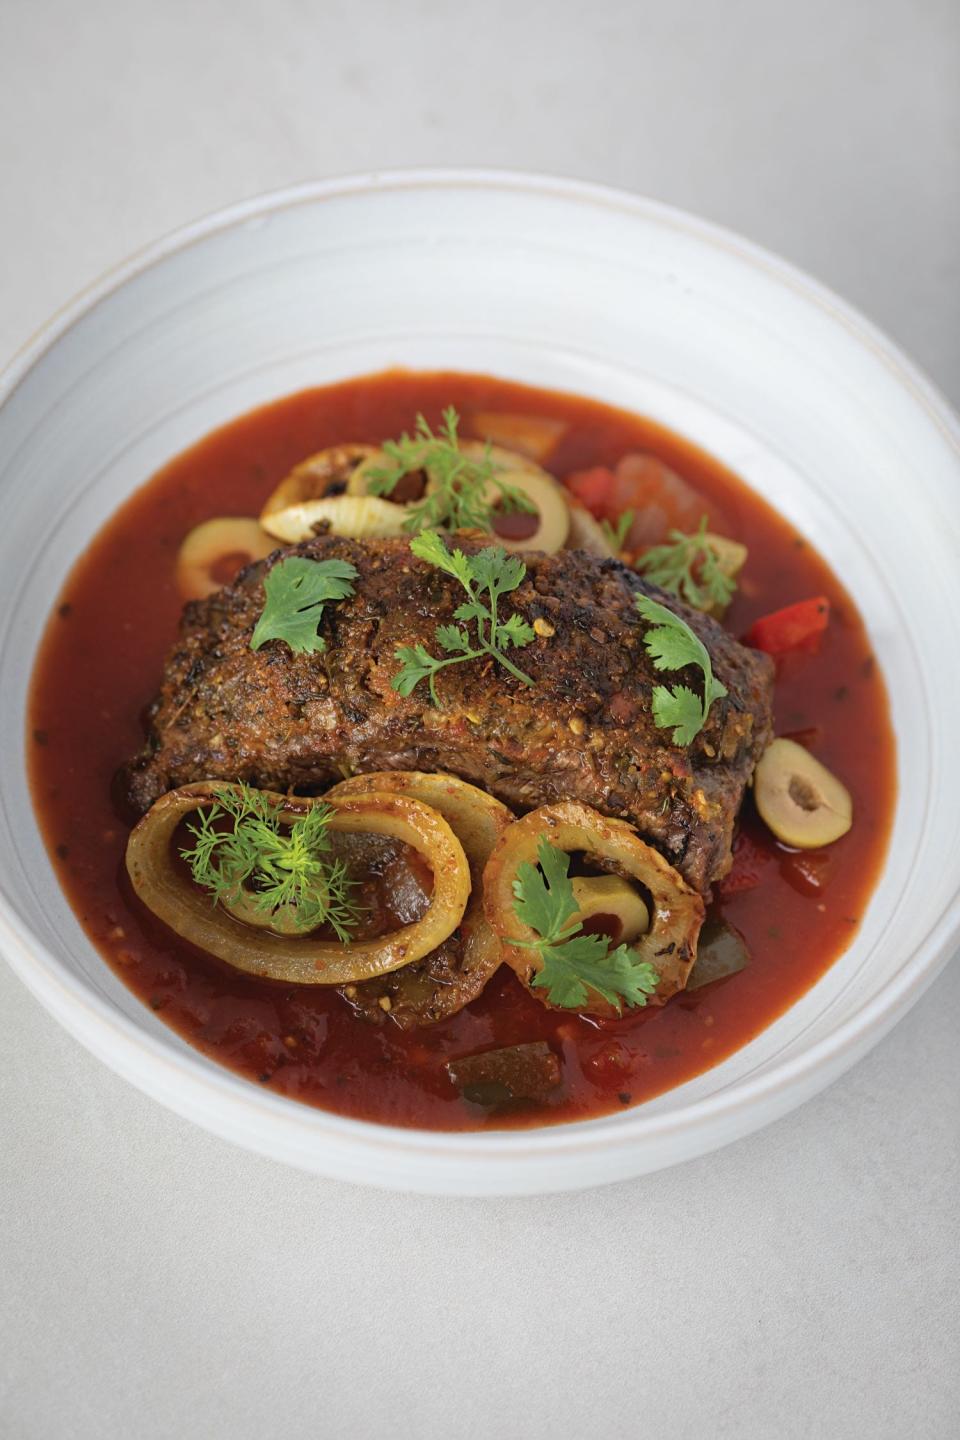 Bistec Encebollado from "Roots, Heart, Soul: The Story, Celebration, and Recipes of Afro Cuisine in America" by Todd Richards with Amy Paige Condon for Harvest an Imprint of Harper Collins